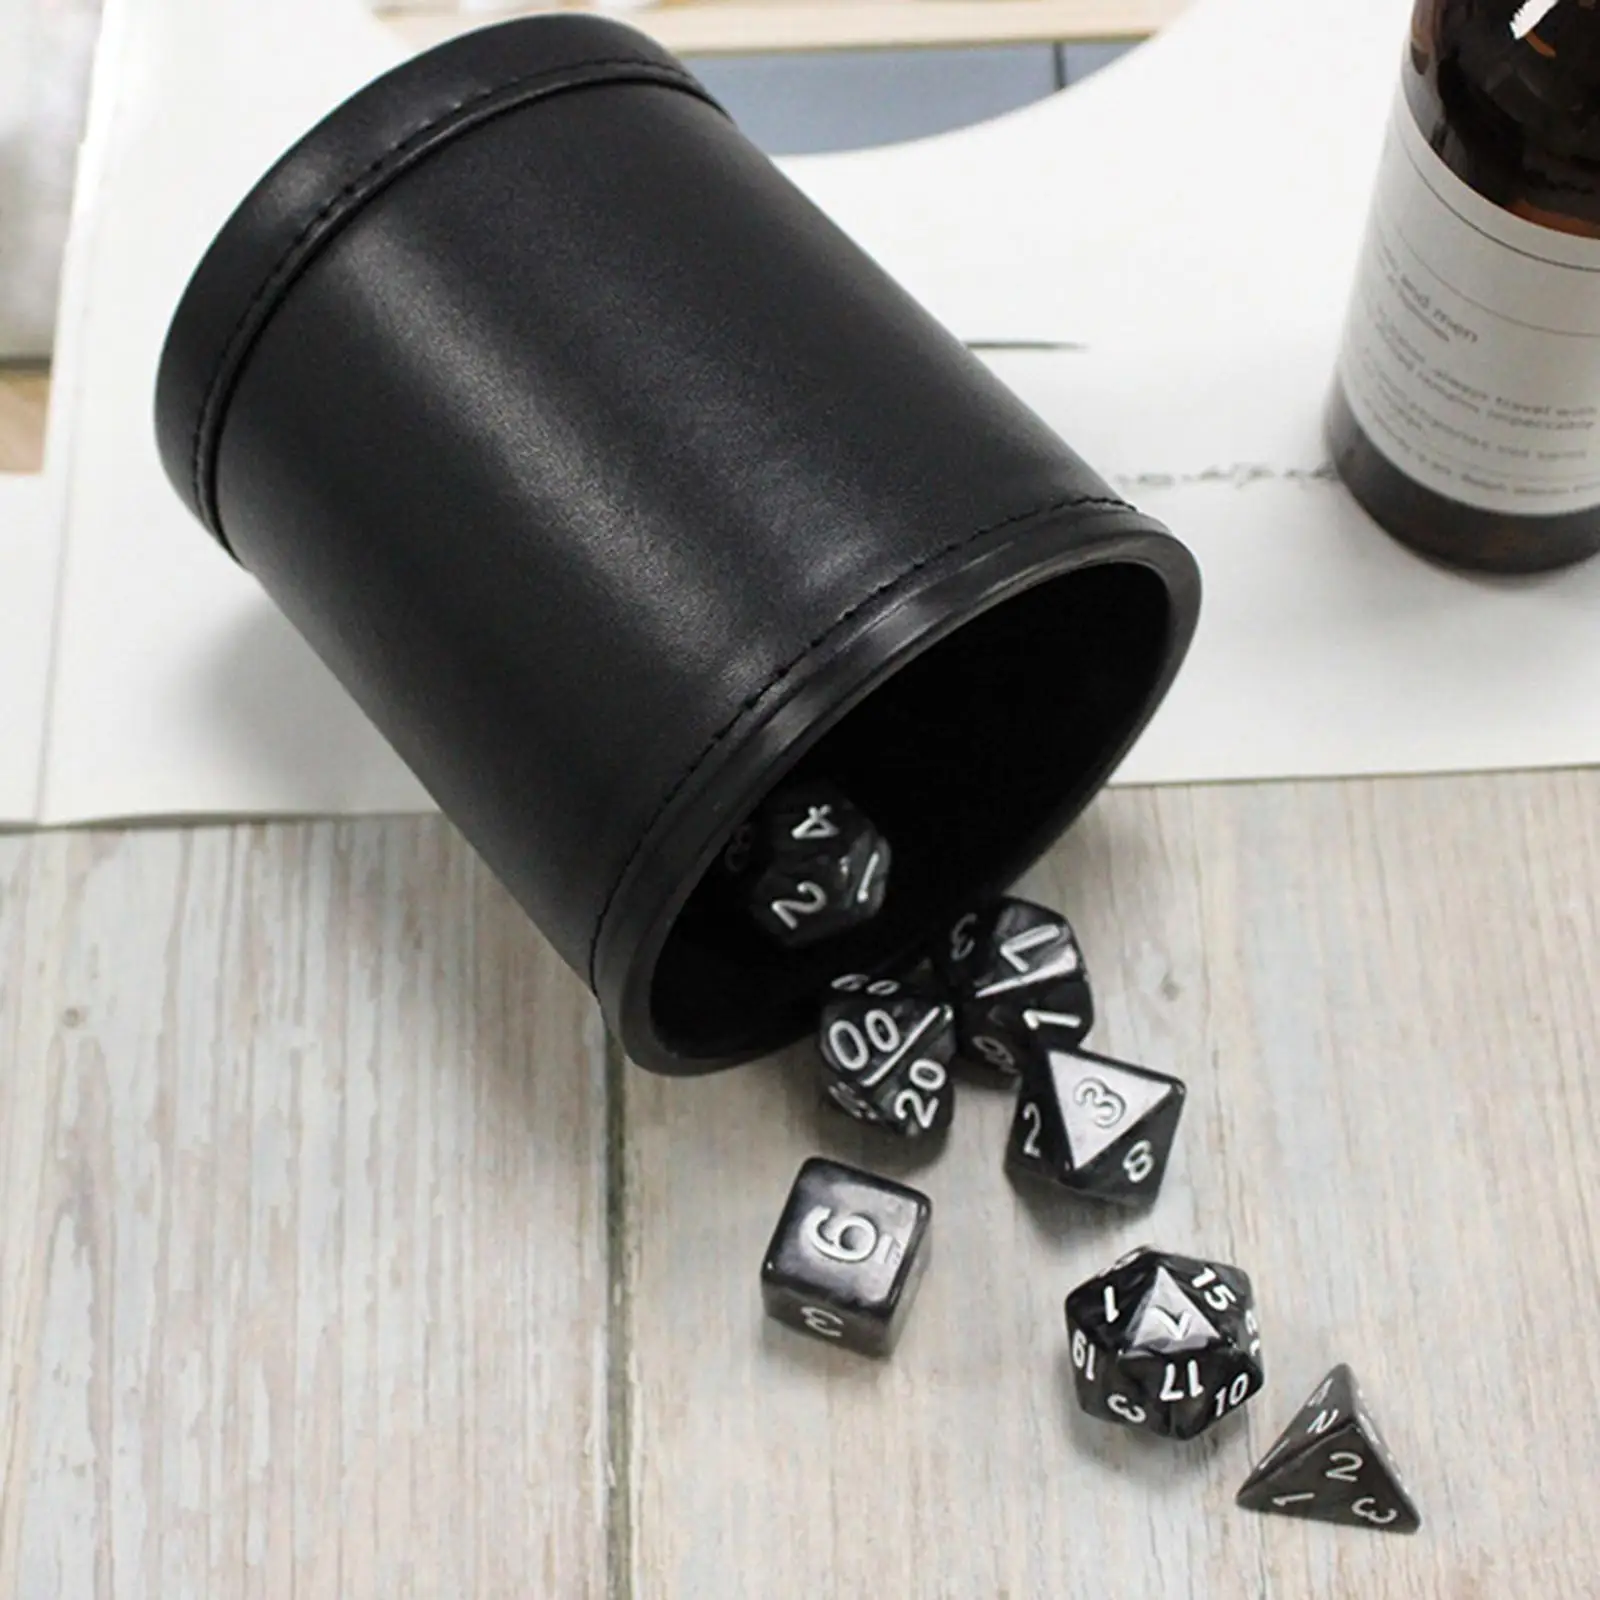 Protable Dice Cup Entertainment Professional Dice Game Supplies Dice Shaker Dice Box for Club Home